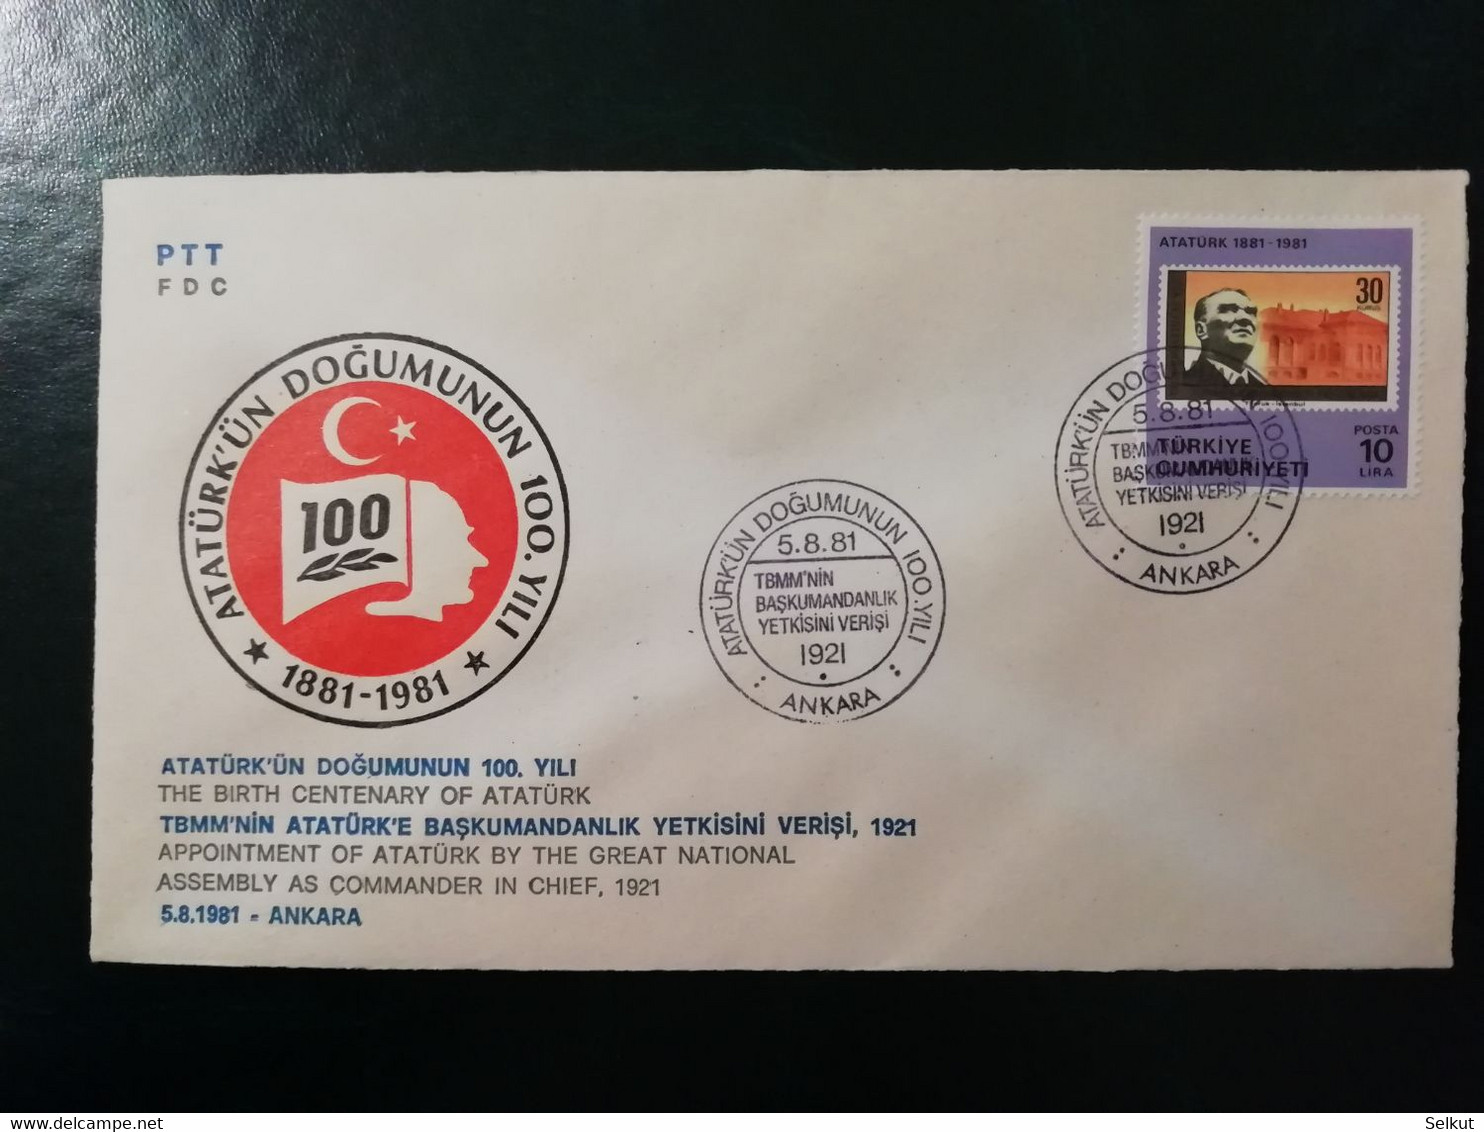 1981 100 YEARS ATATURK BIRTH – APPONTMENT OF ATATURK COMMANDER IN CHIEF 1921 - Covers & Documents